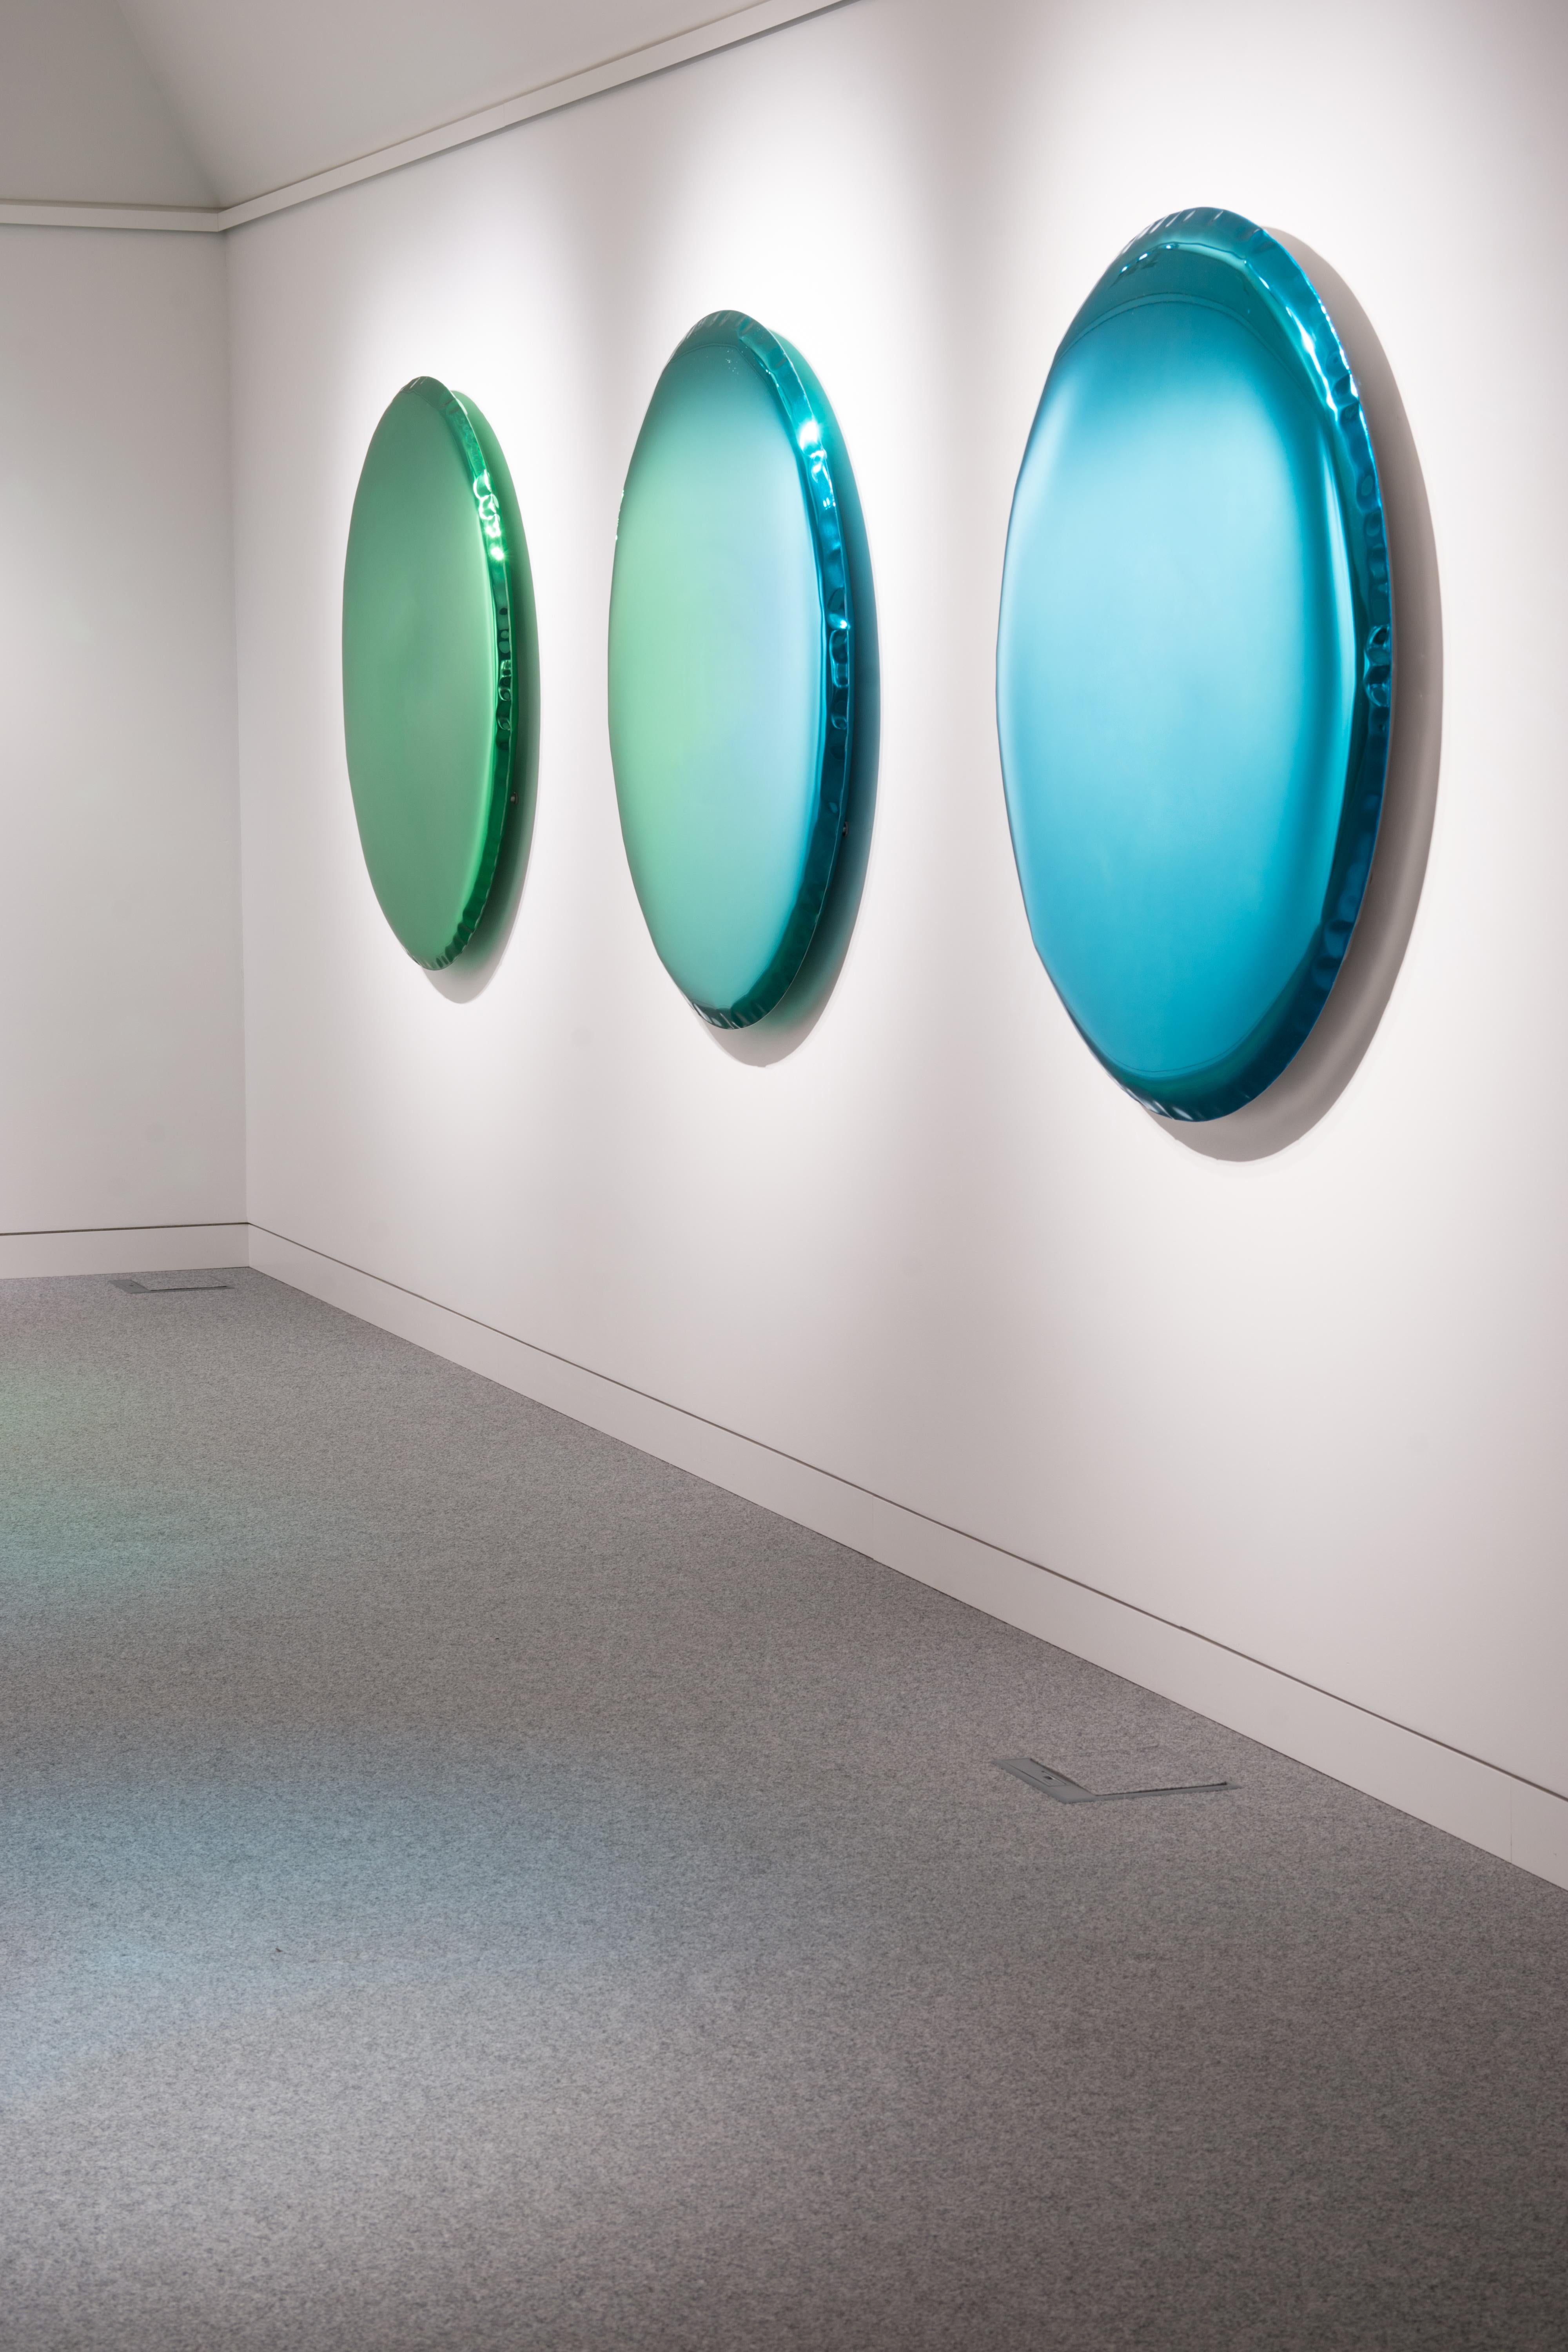 OKO 150 contemporary mirror by Zieta
Sapphire
Gradient collection
New model created in 2020

Stainless steel
Measures: 150 x 6 cm.

Three colors available: 
- Emerald green 
- Sapphire blue
- Gradient emerald/sapphire

Zieta is best known for his